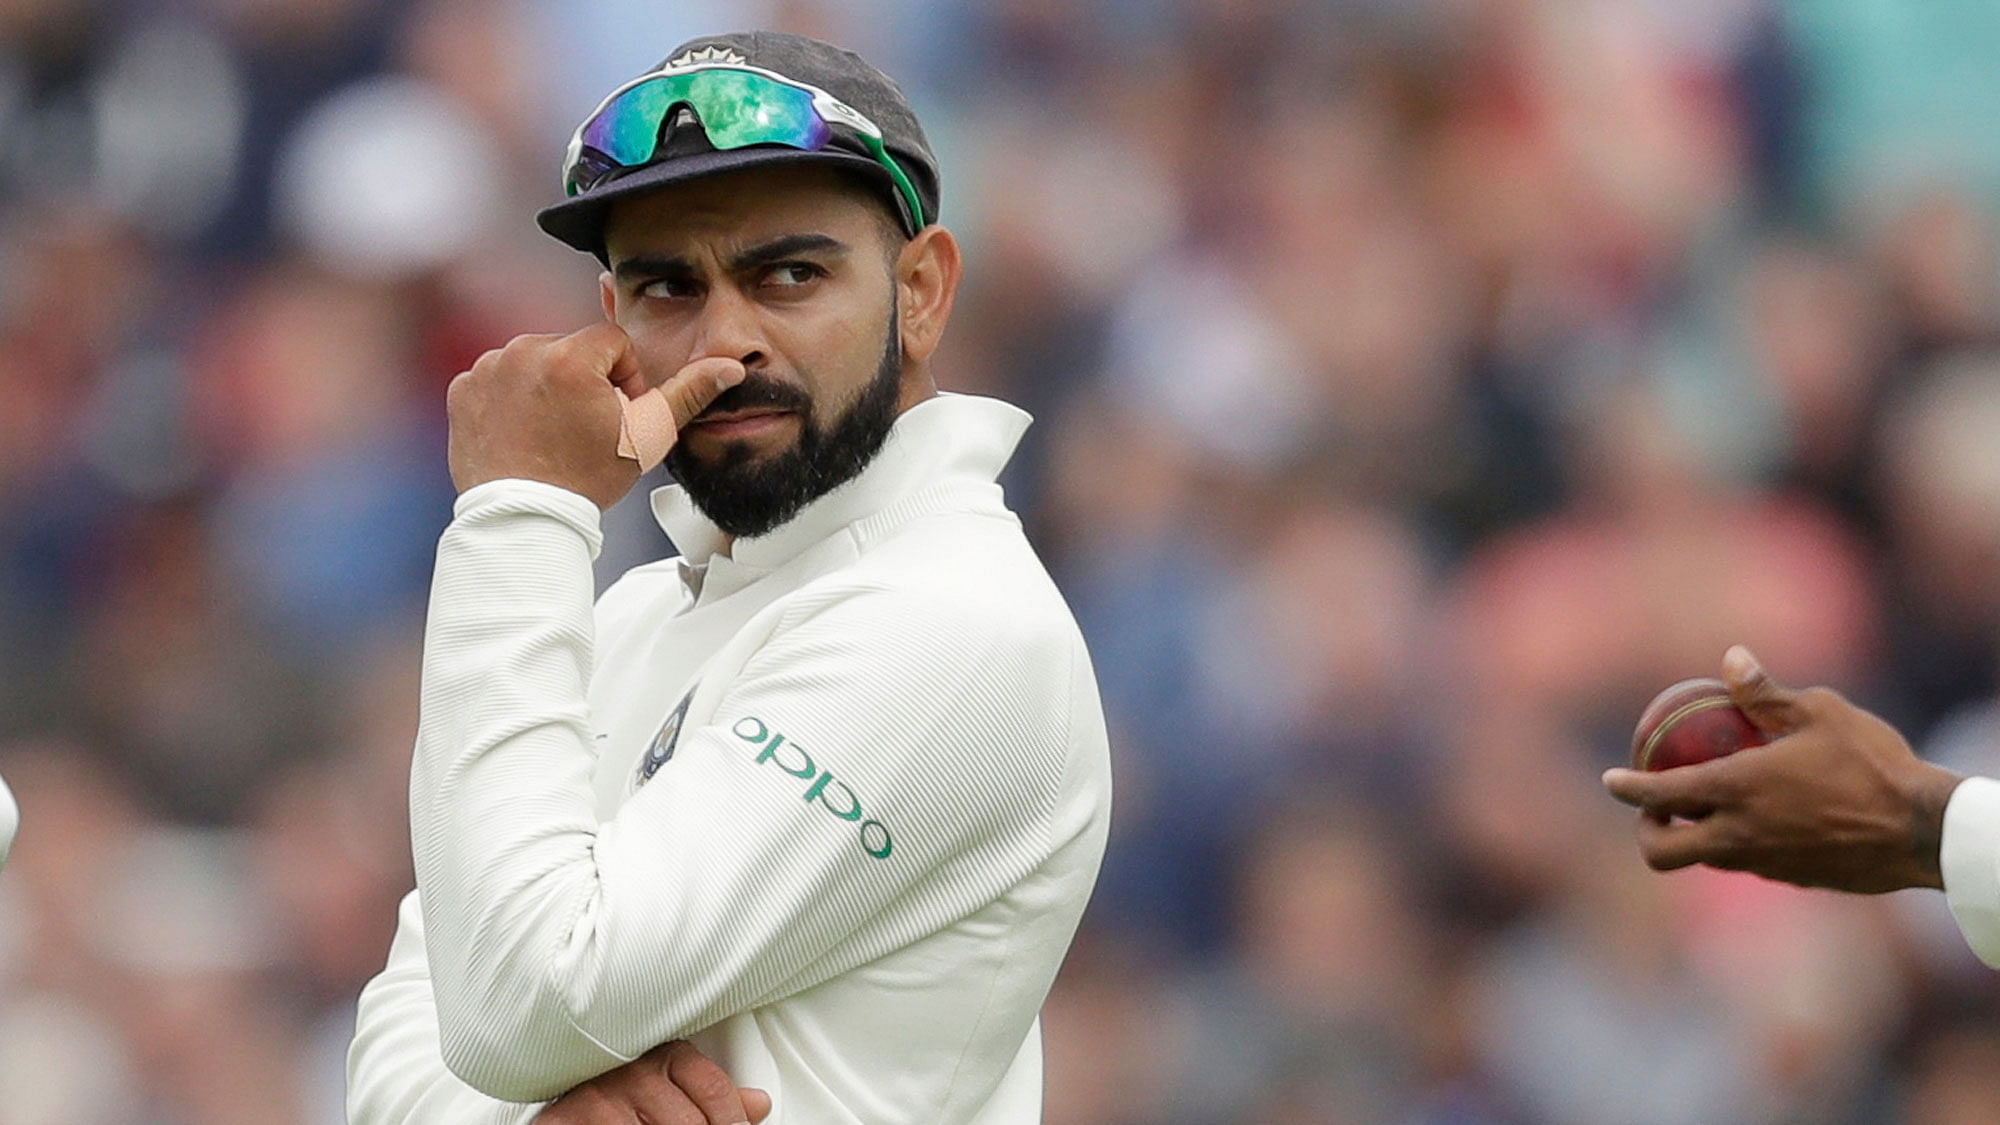 As much he’s adored for his on-field exploits, Virat Kohli has on several occasions been lambasted for his comments and actions.